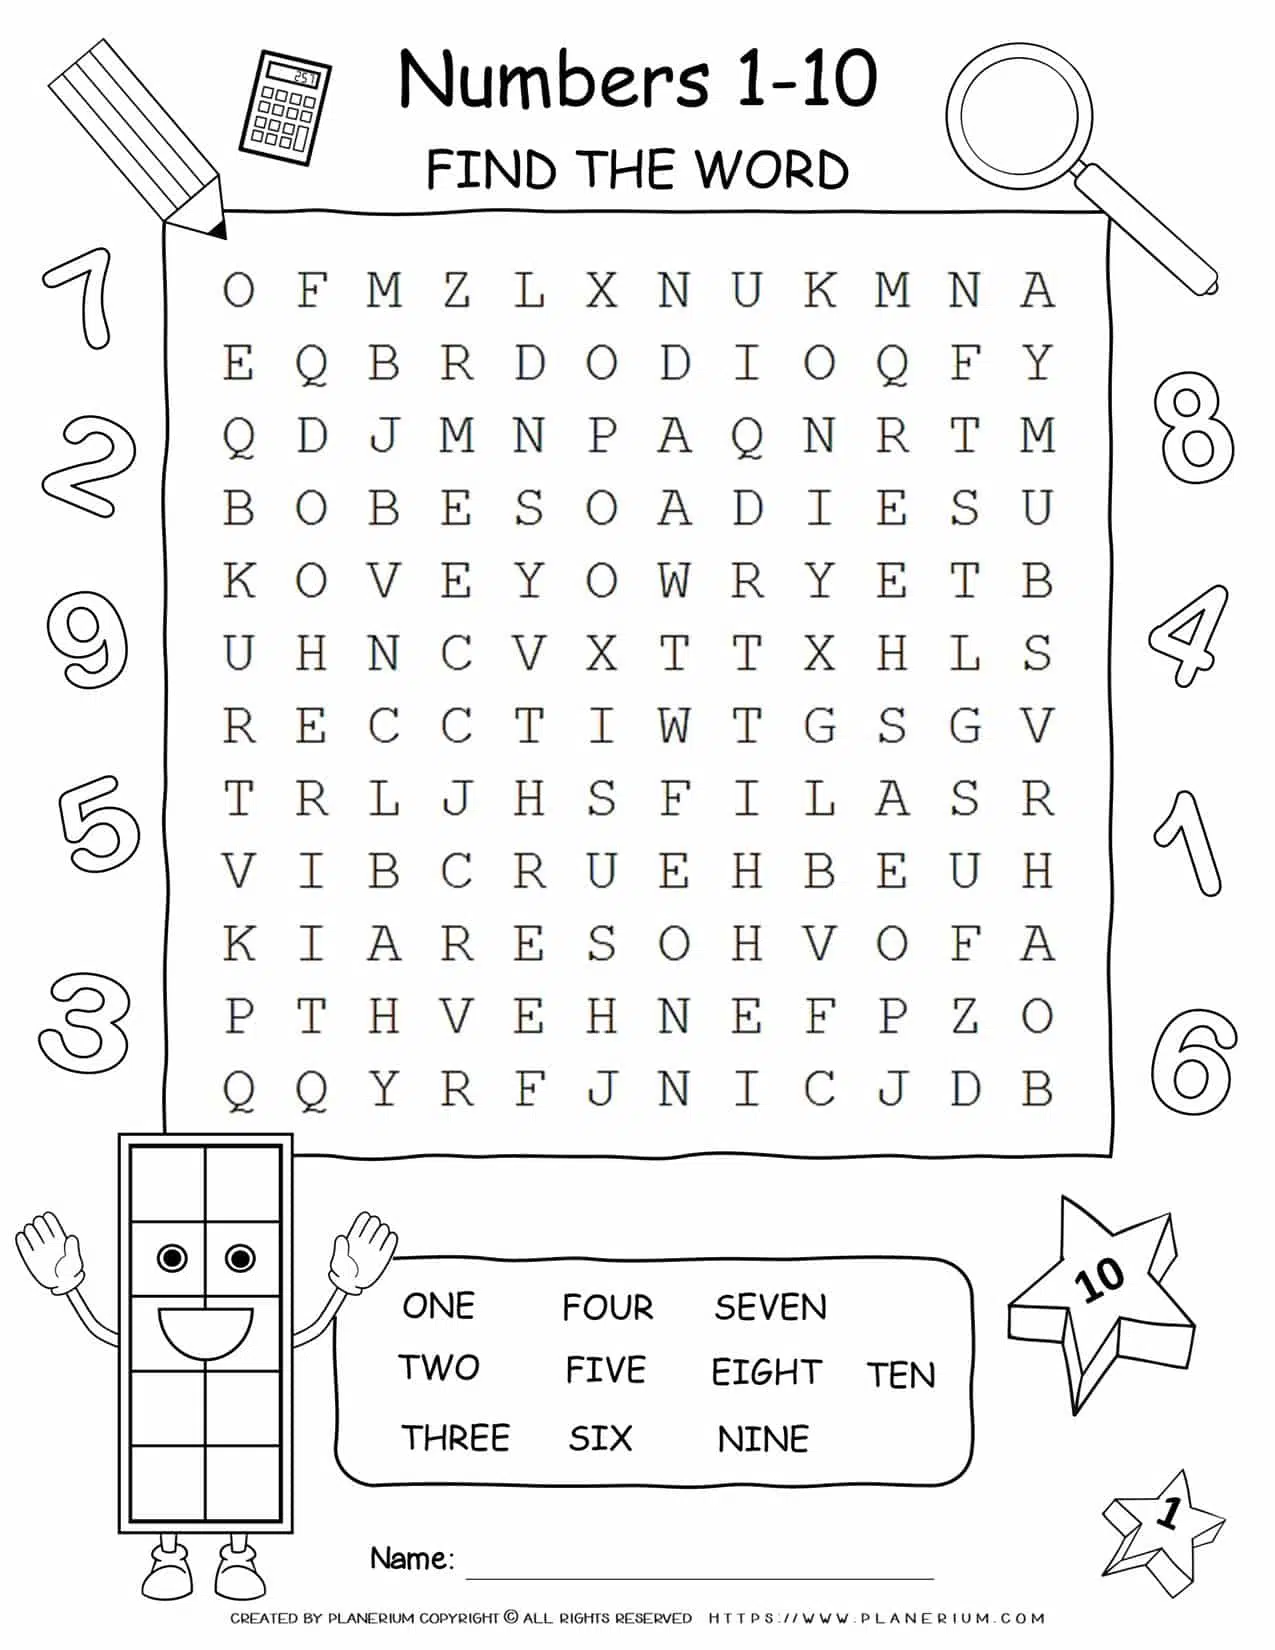 numbers-1-10-word-search-puzzle-planerium